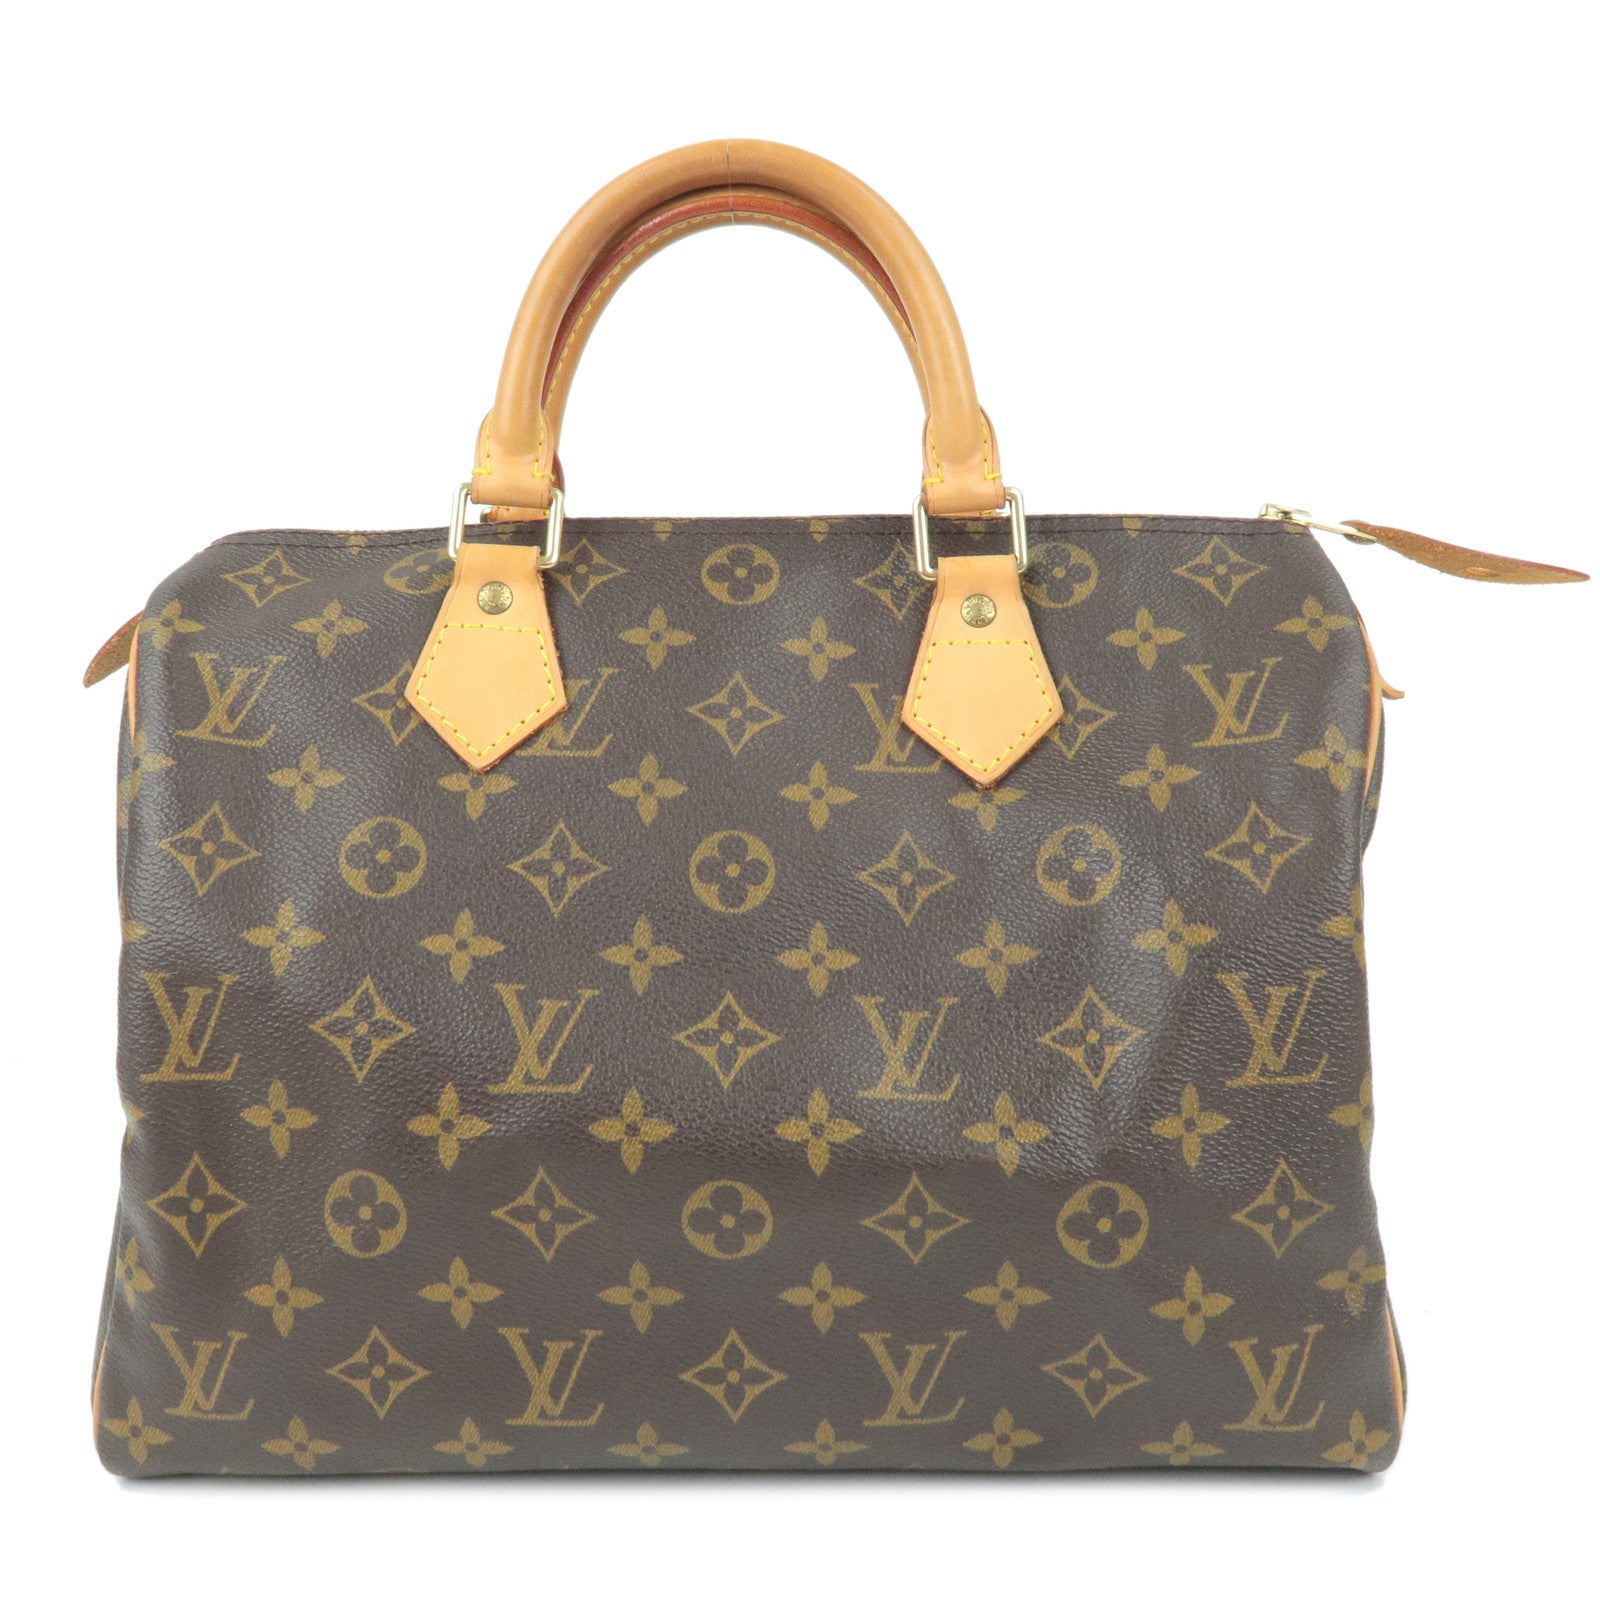 my very first LV! Pre-loved Speedy 30 from 2007. hoping to get a